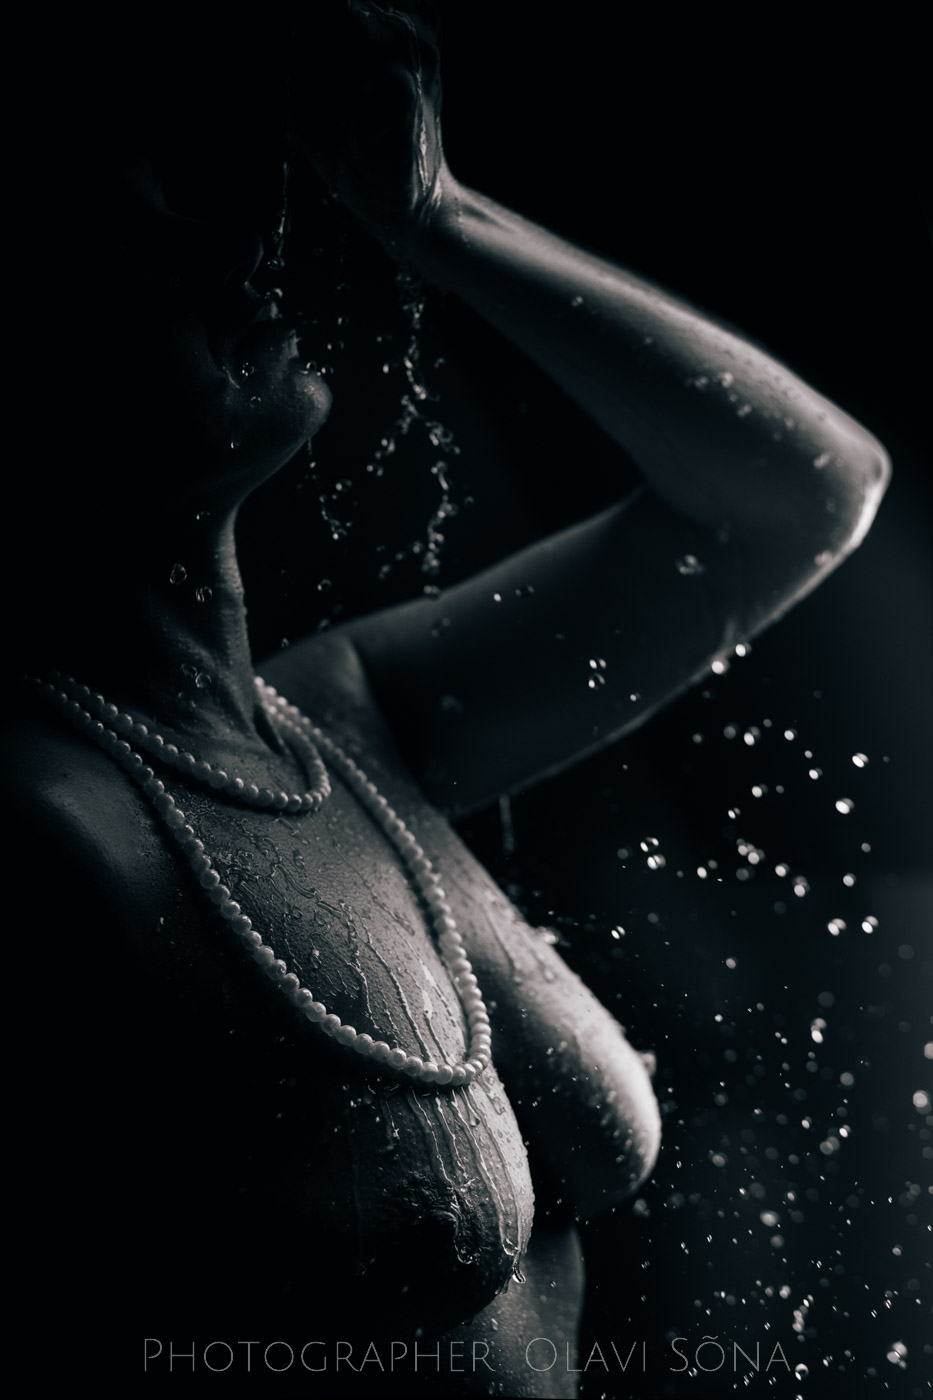 Woman pouring water on her self. She is nude and wearing pearls